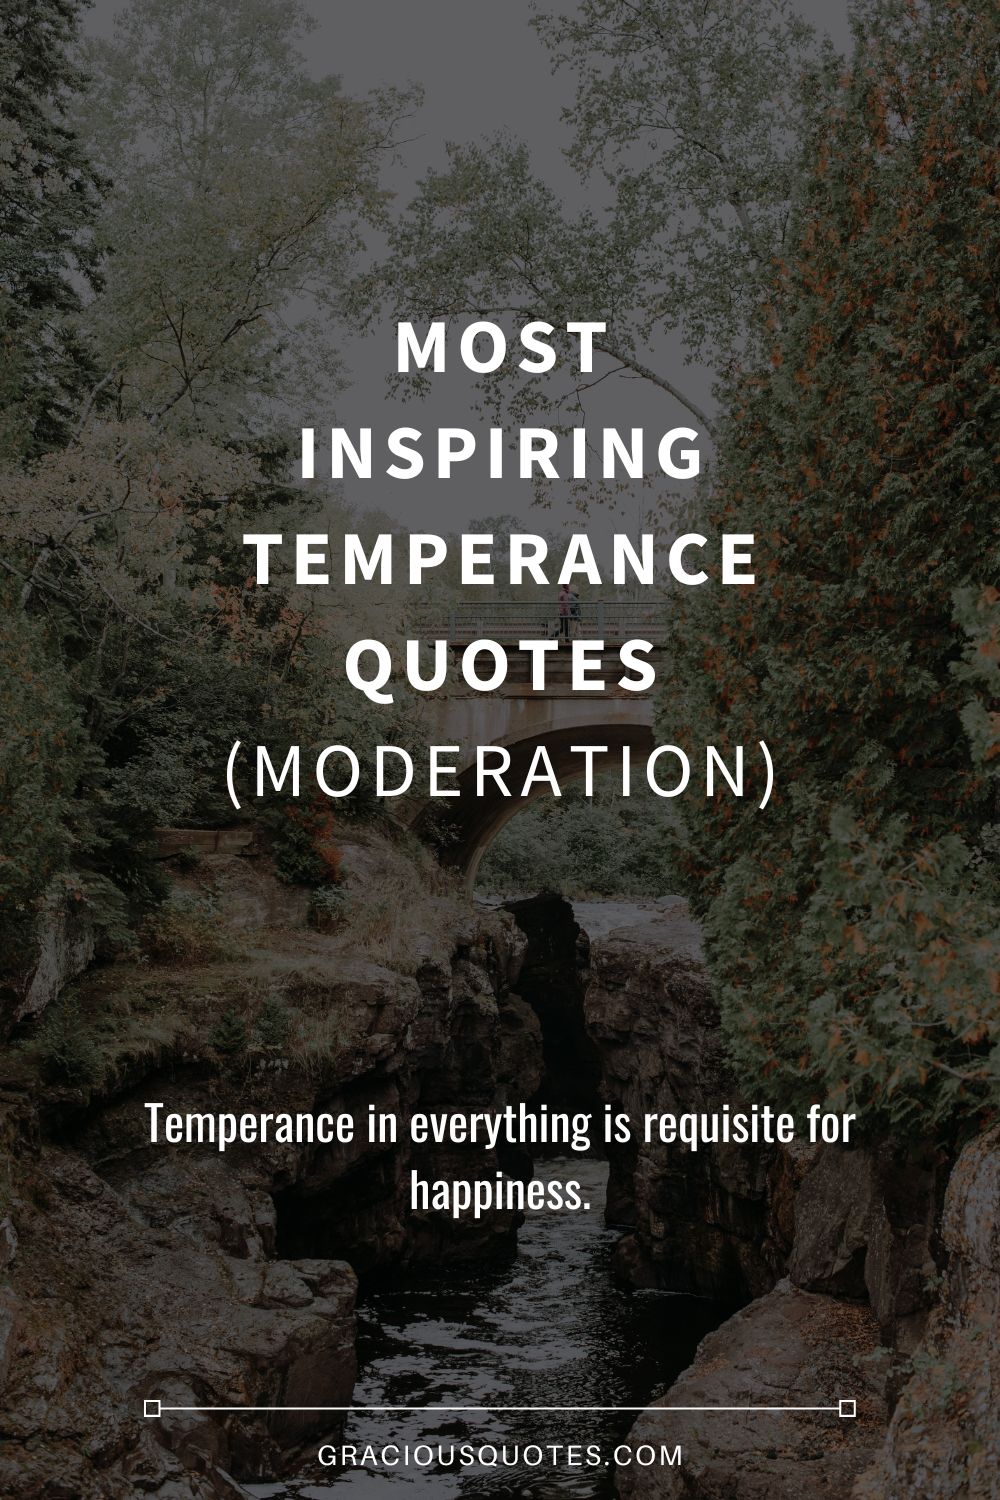 Most Inspiring Temperance Quotes (MODERATION) - Gracious Quotes